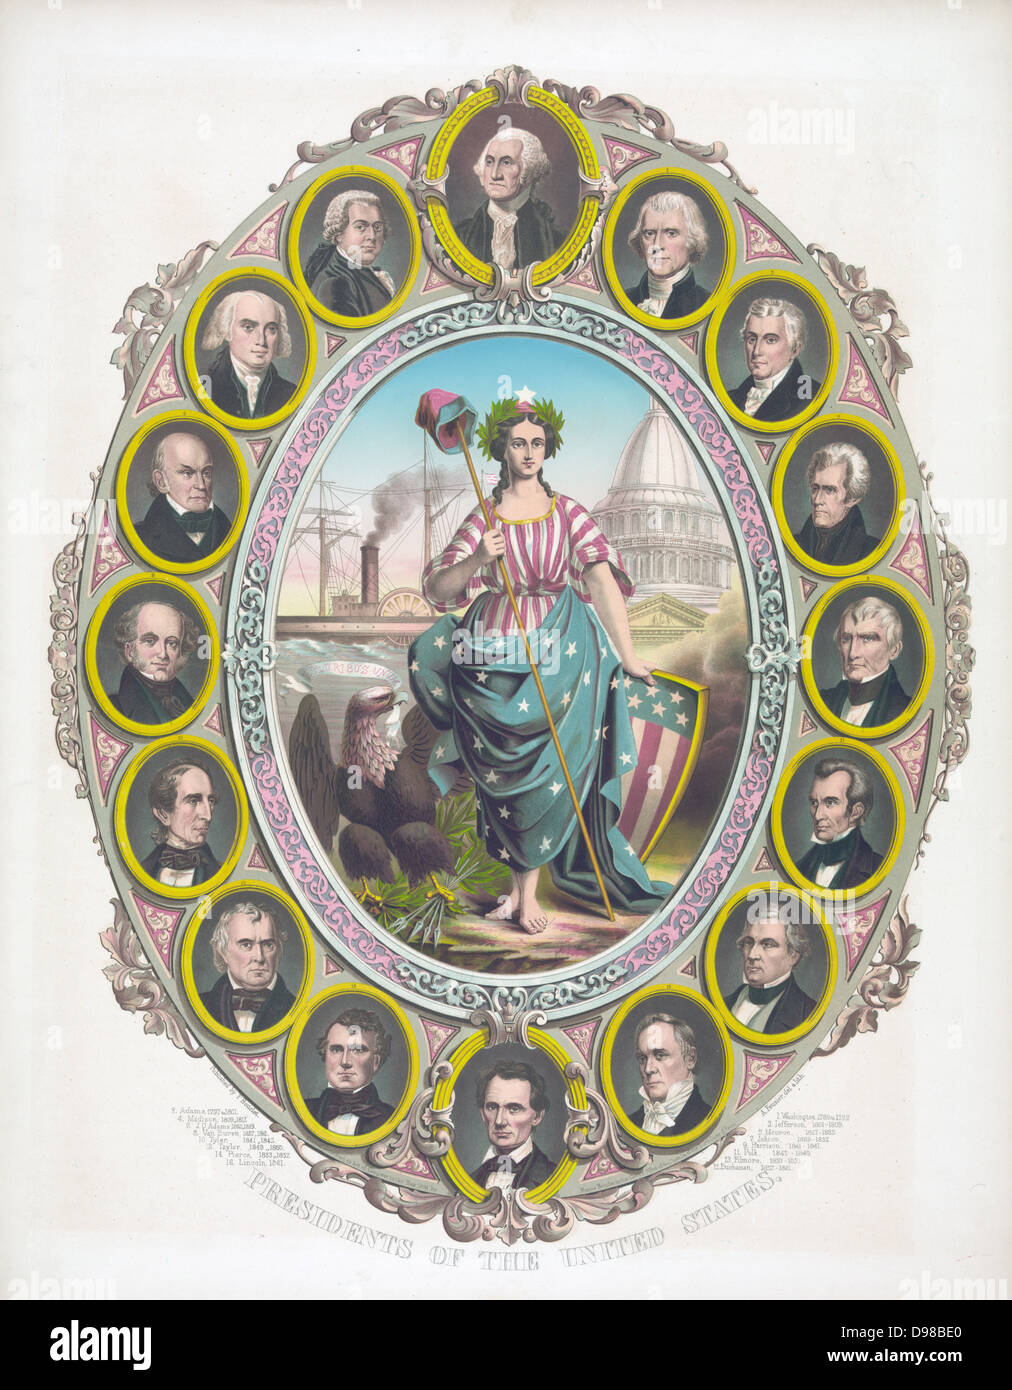 Columbia dressed in stars and stripes, holding a cap of liberty and accompanied by a Bald Eagle, surrounded by portraits of the first 16 presidents of the USA , Washington at top, a beardless Lincoln at the bottom. Coloured lithograph c1861. Stock Photo